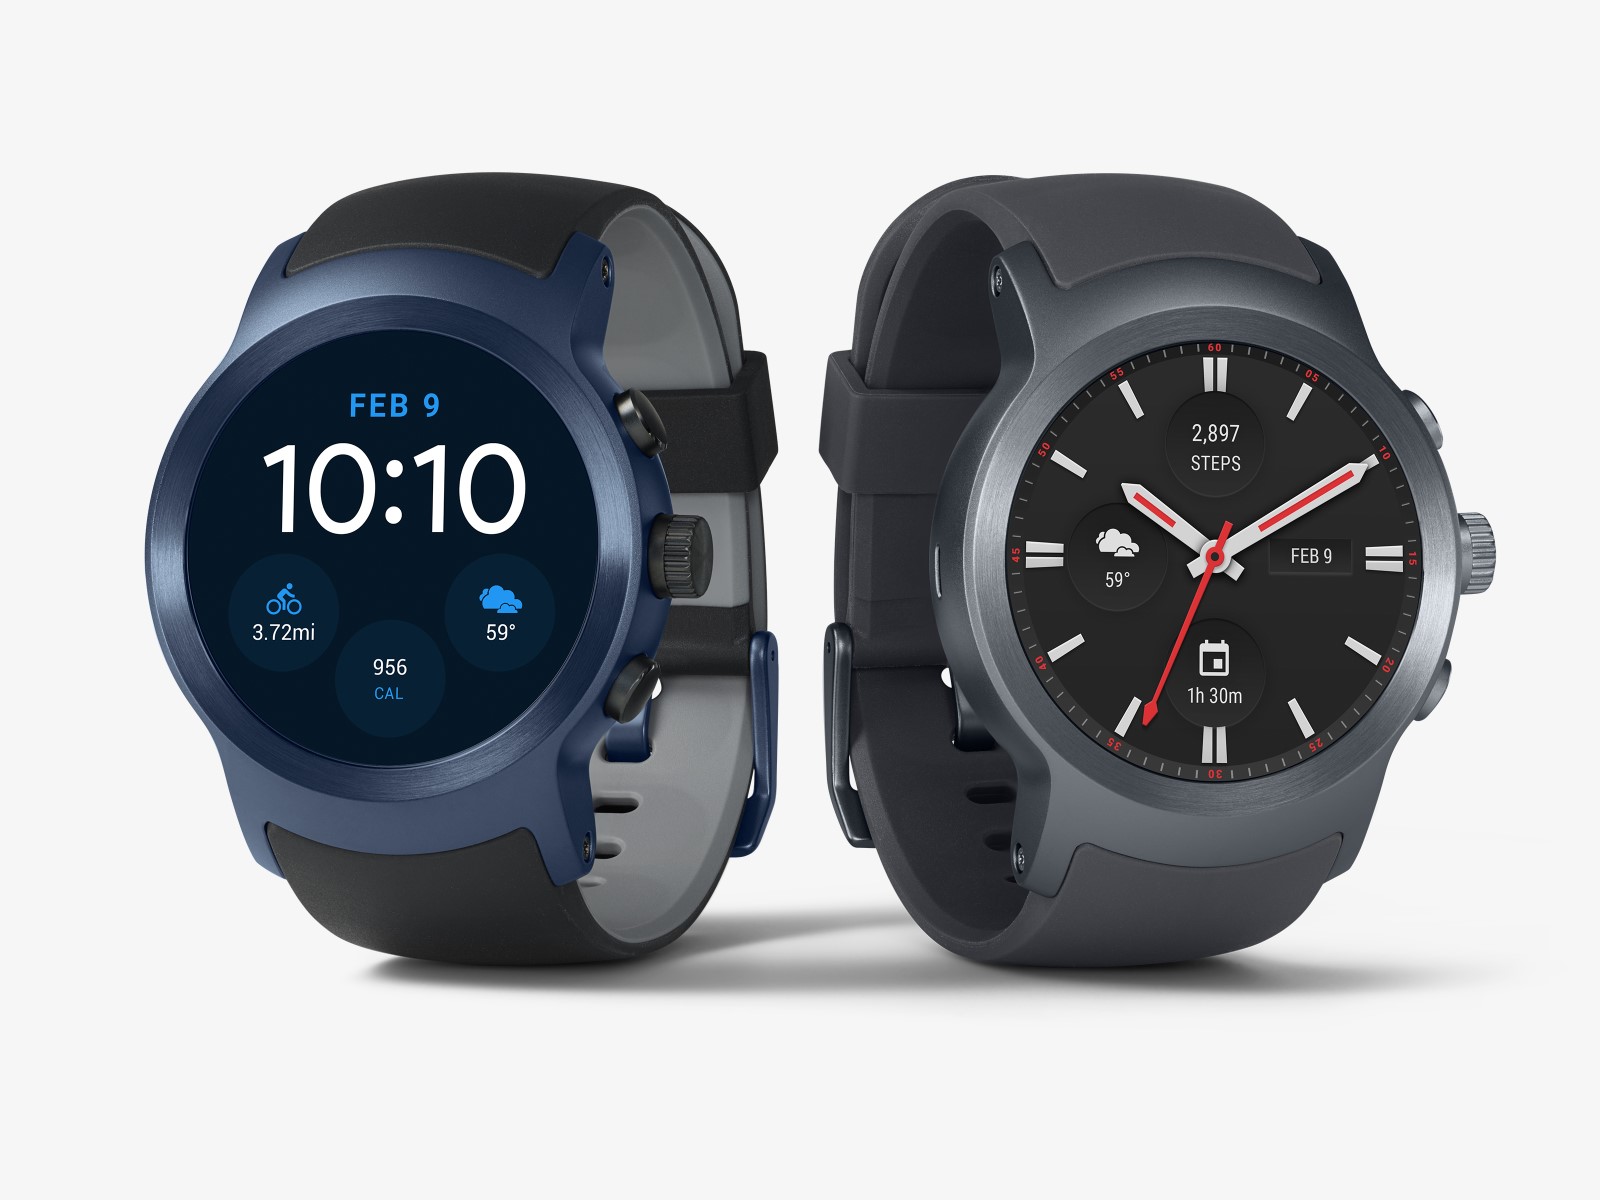 Here are the smartwatches that will get Android Wear 2.0 update